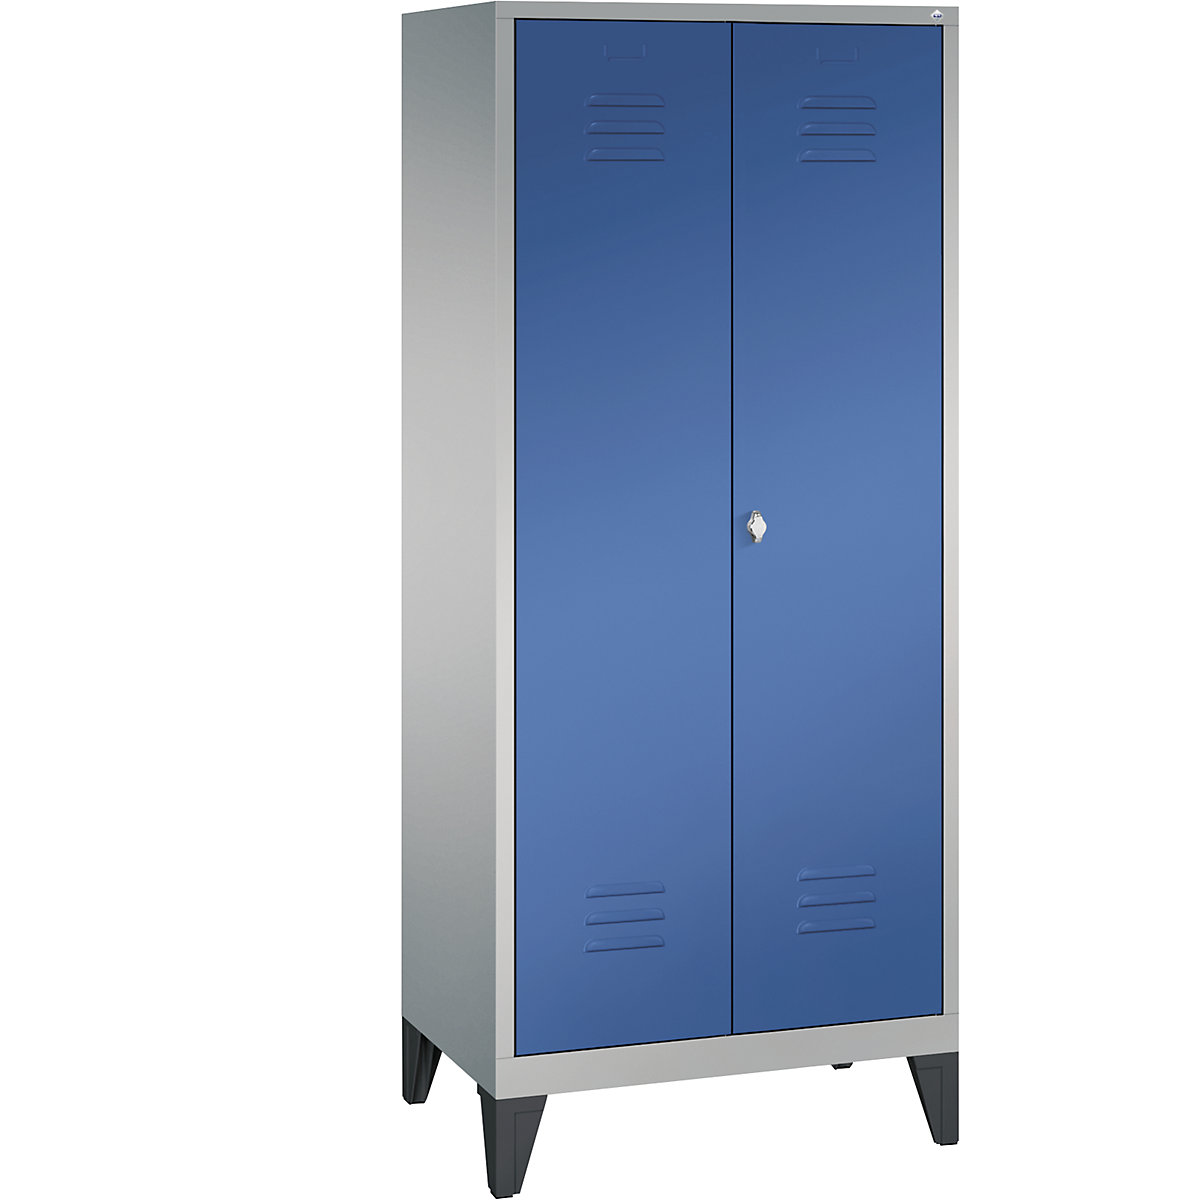 CLASSIC equipment cupboard with feet – C+P, 2 compartments, compartment width 400 mm, white aluminium / gentian blue-10